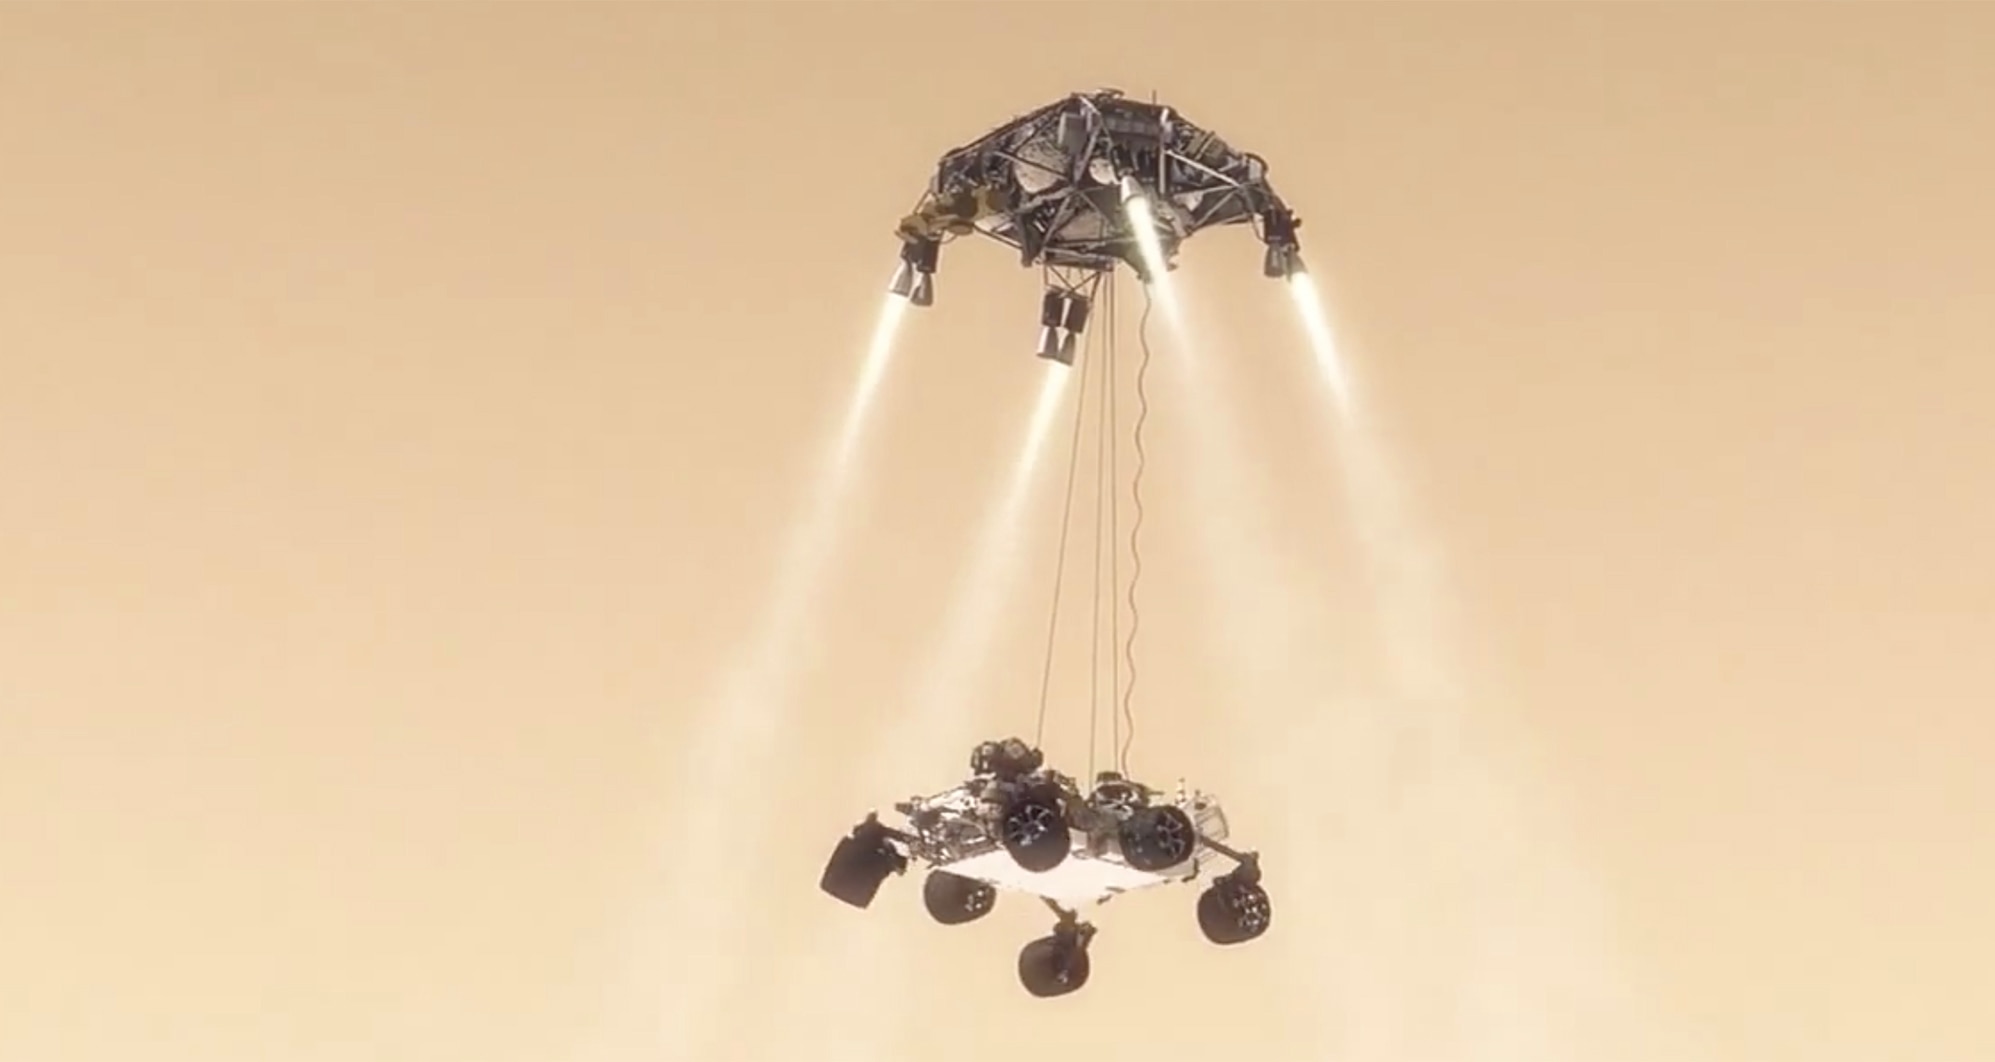 Curiosity suspended beneath the skycrane as it descends toward Mars. Frame from the animation "Seven Minutes of Terror". Credit: NASA / JPL 